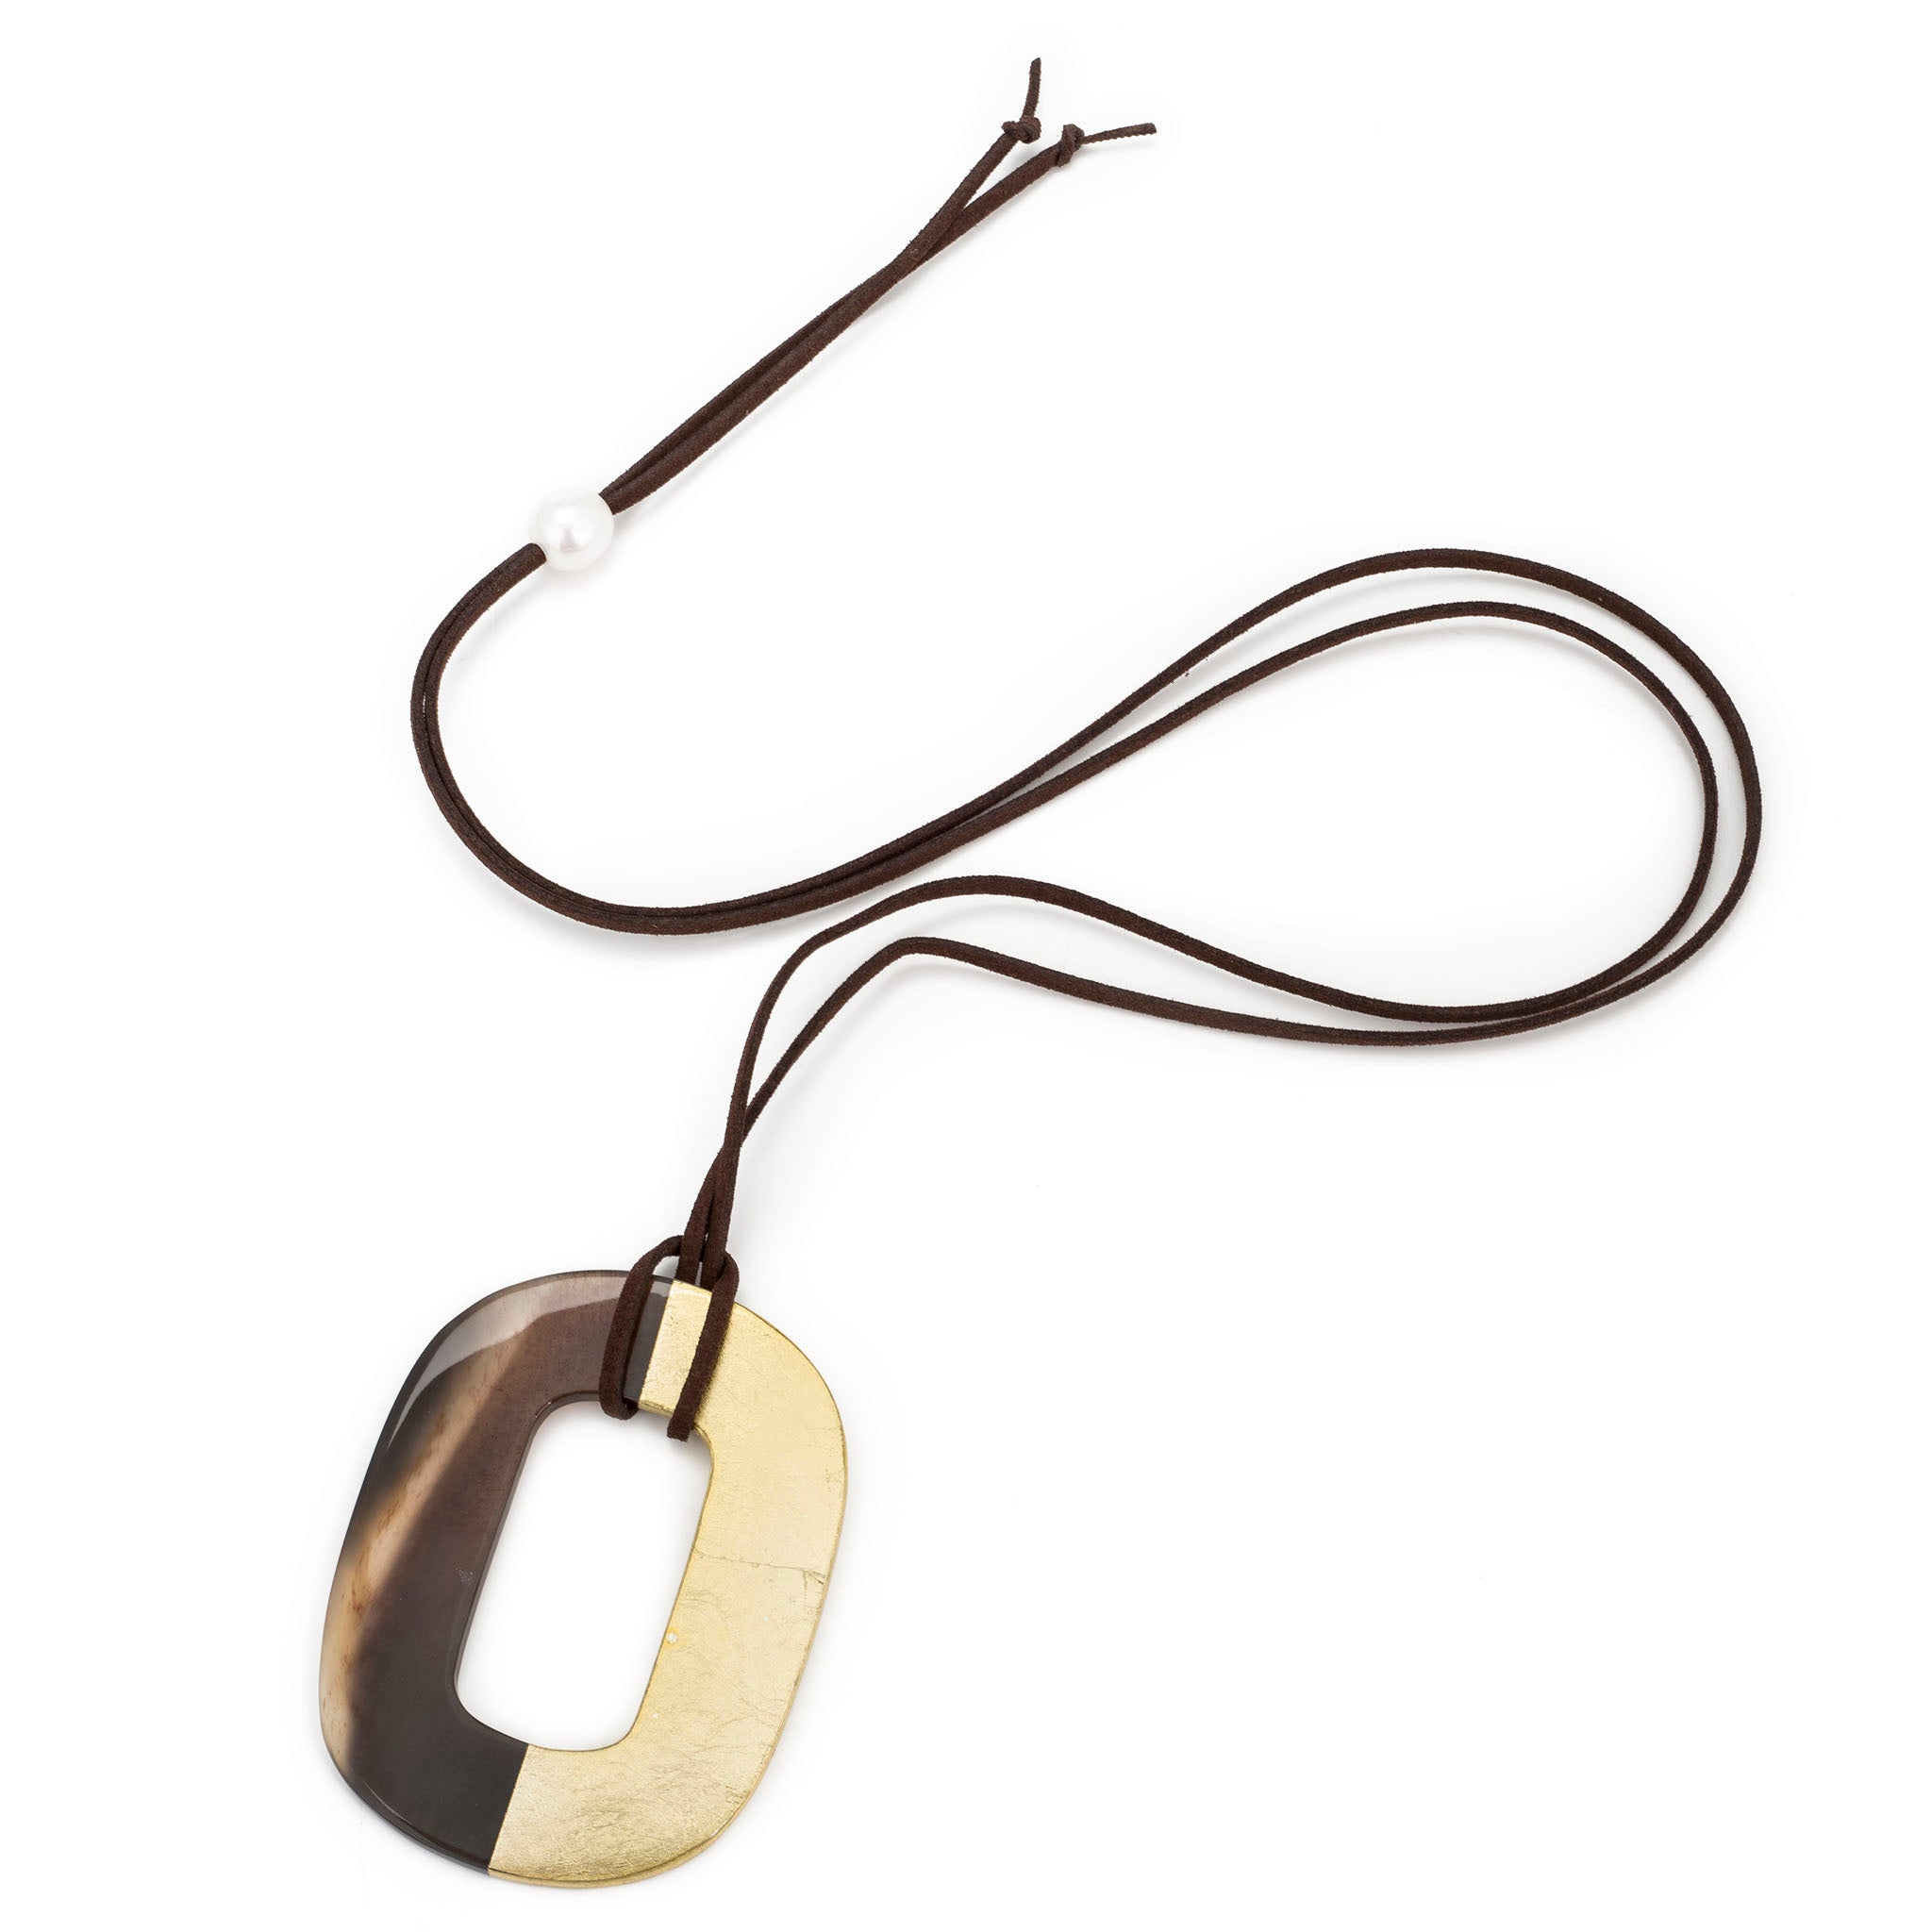 Oval Buffalo Horn Pendant Half Gold Leaf Lacquer Cord View - Vivo Direct 